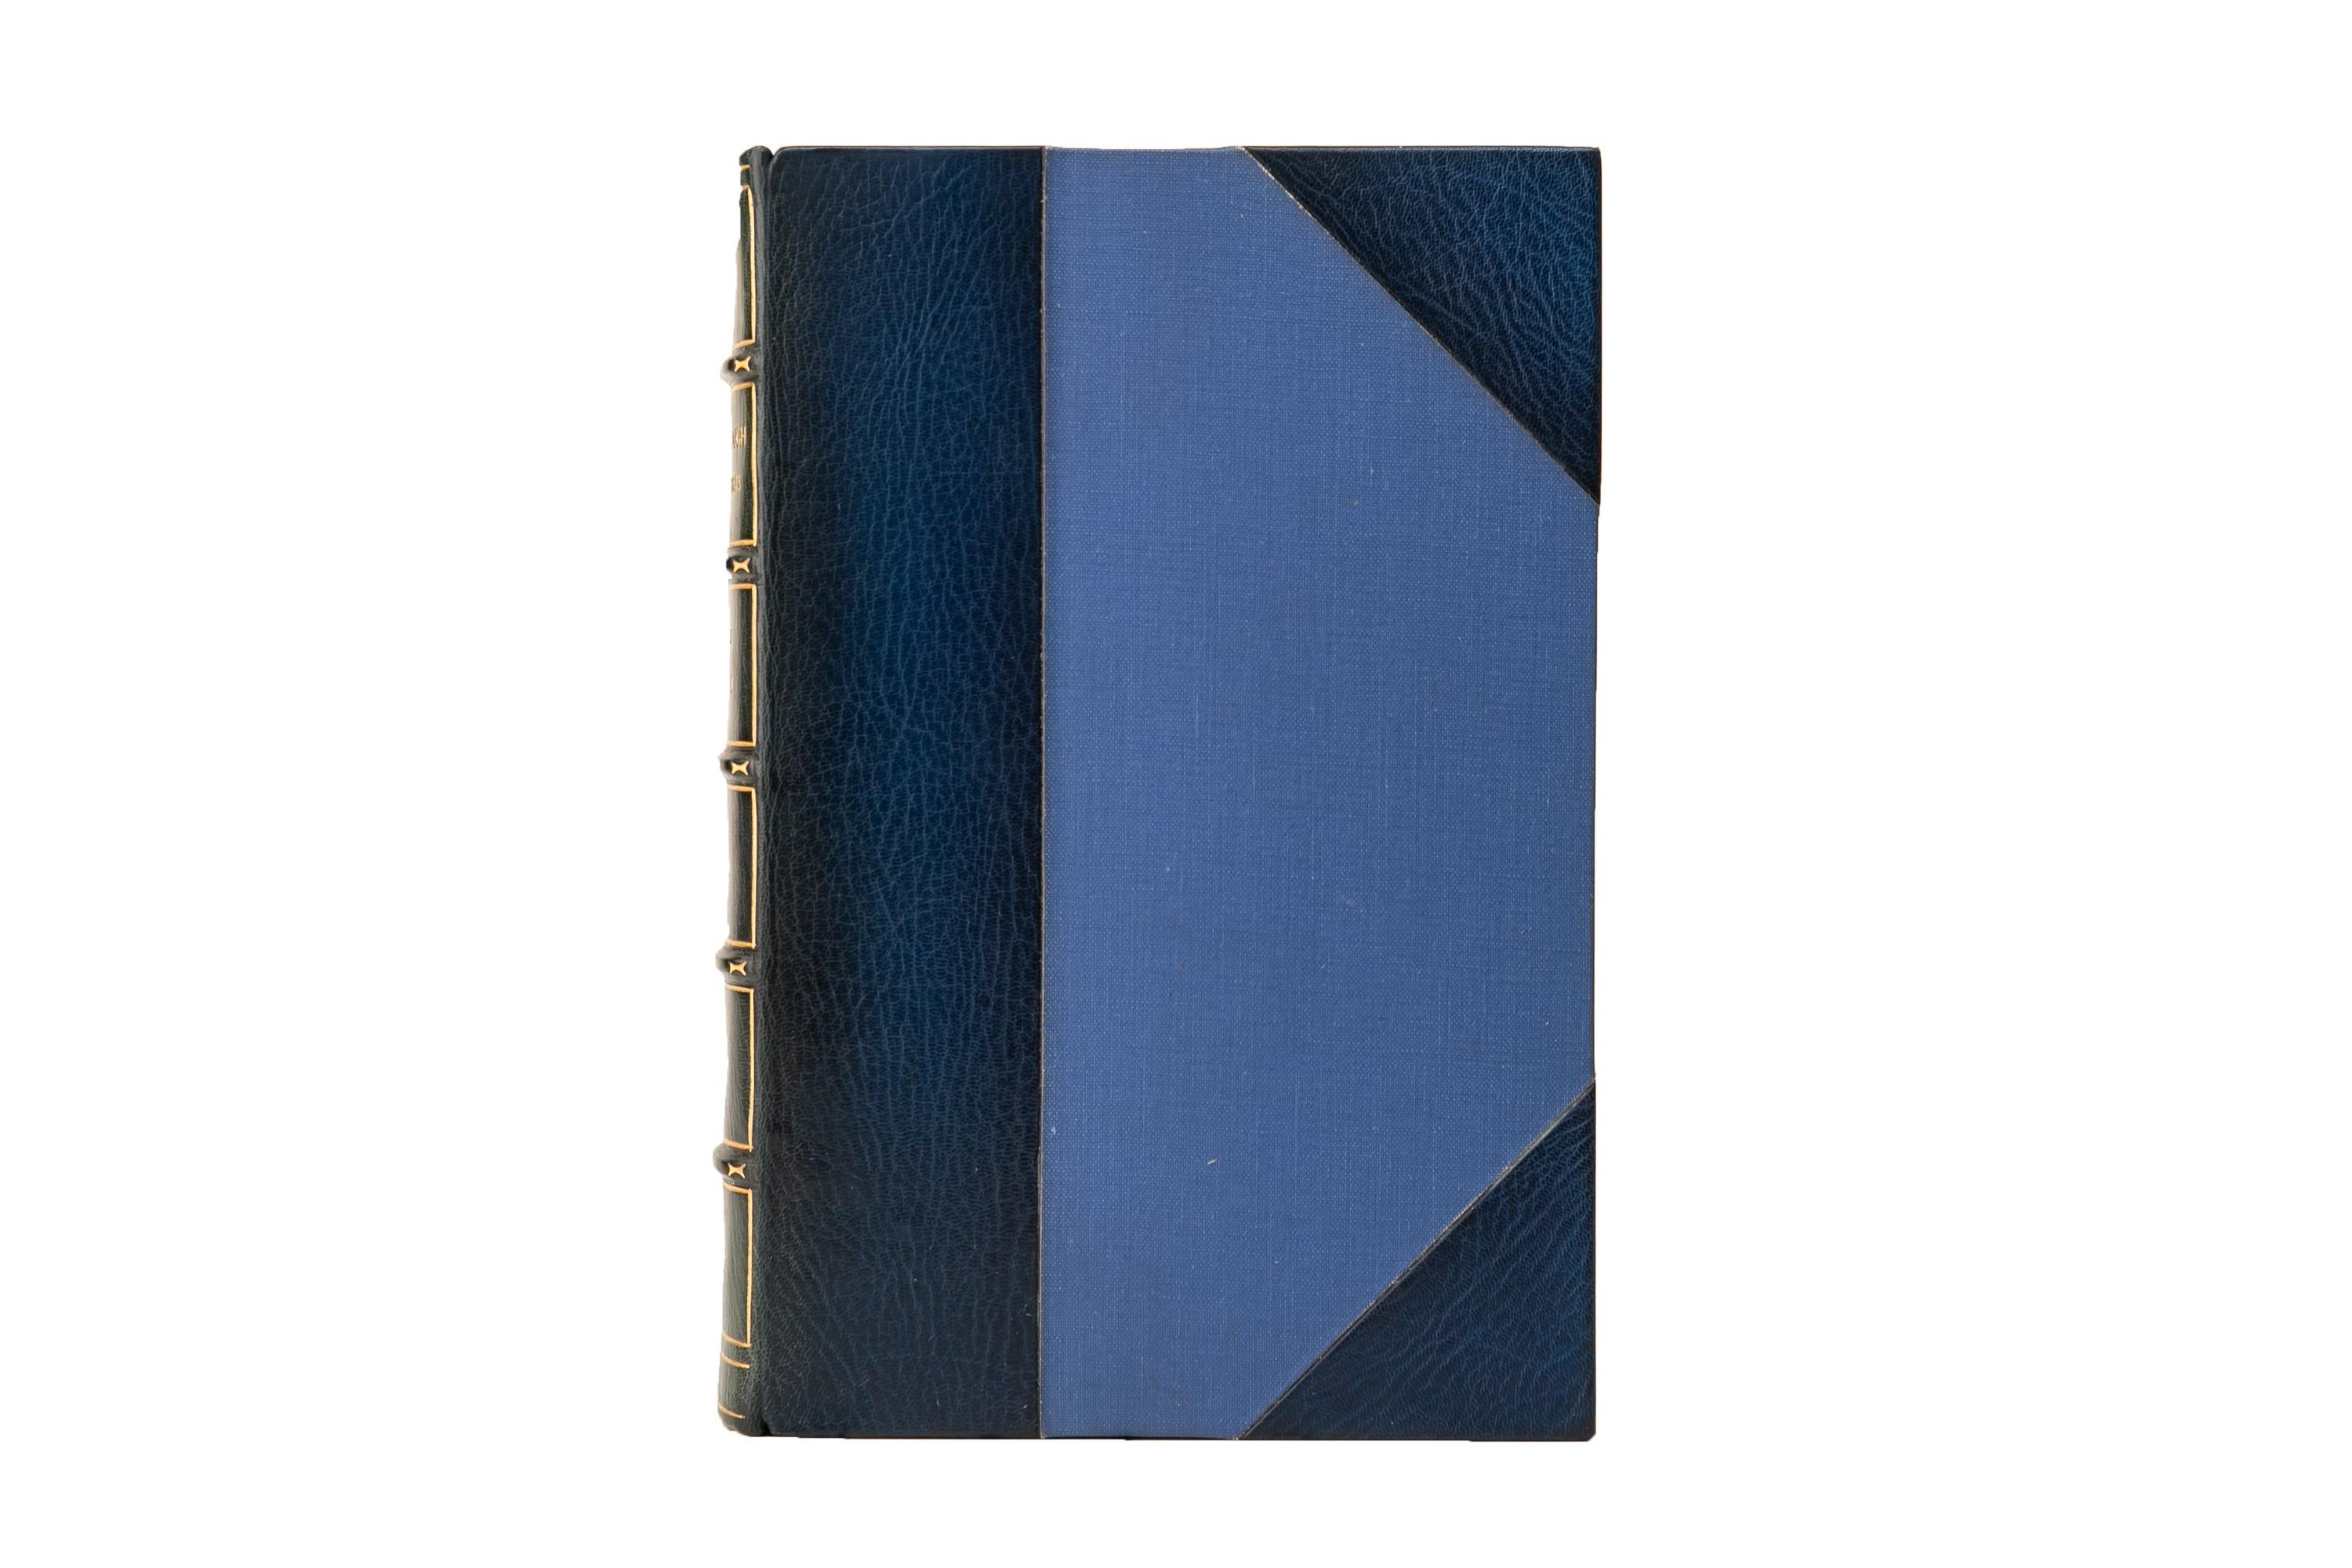 4 Volumes. Winston Churchill, Marlborough: His Life & Times. First Edition. Bound by Frost & Co. in 3/4 blue morocco and linen boards with the raised band spines gilt-tooled. The tip edge is gilt with marbled endpapers. London: George G. Harrap &